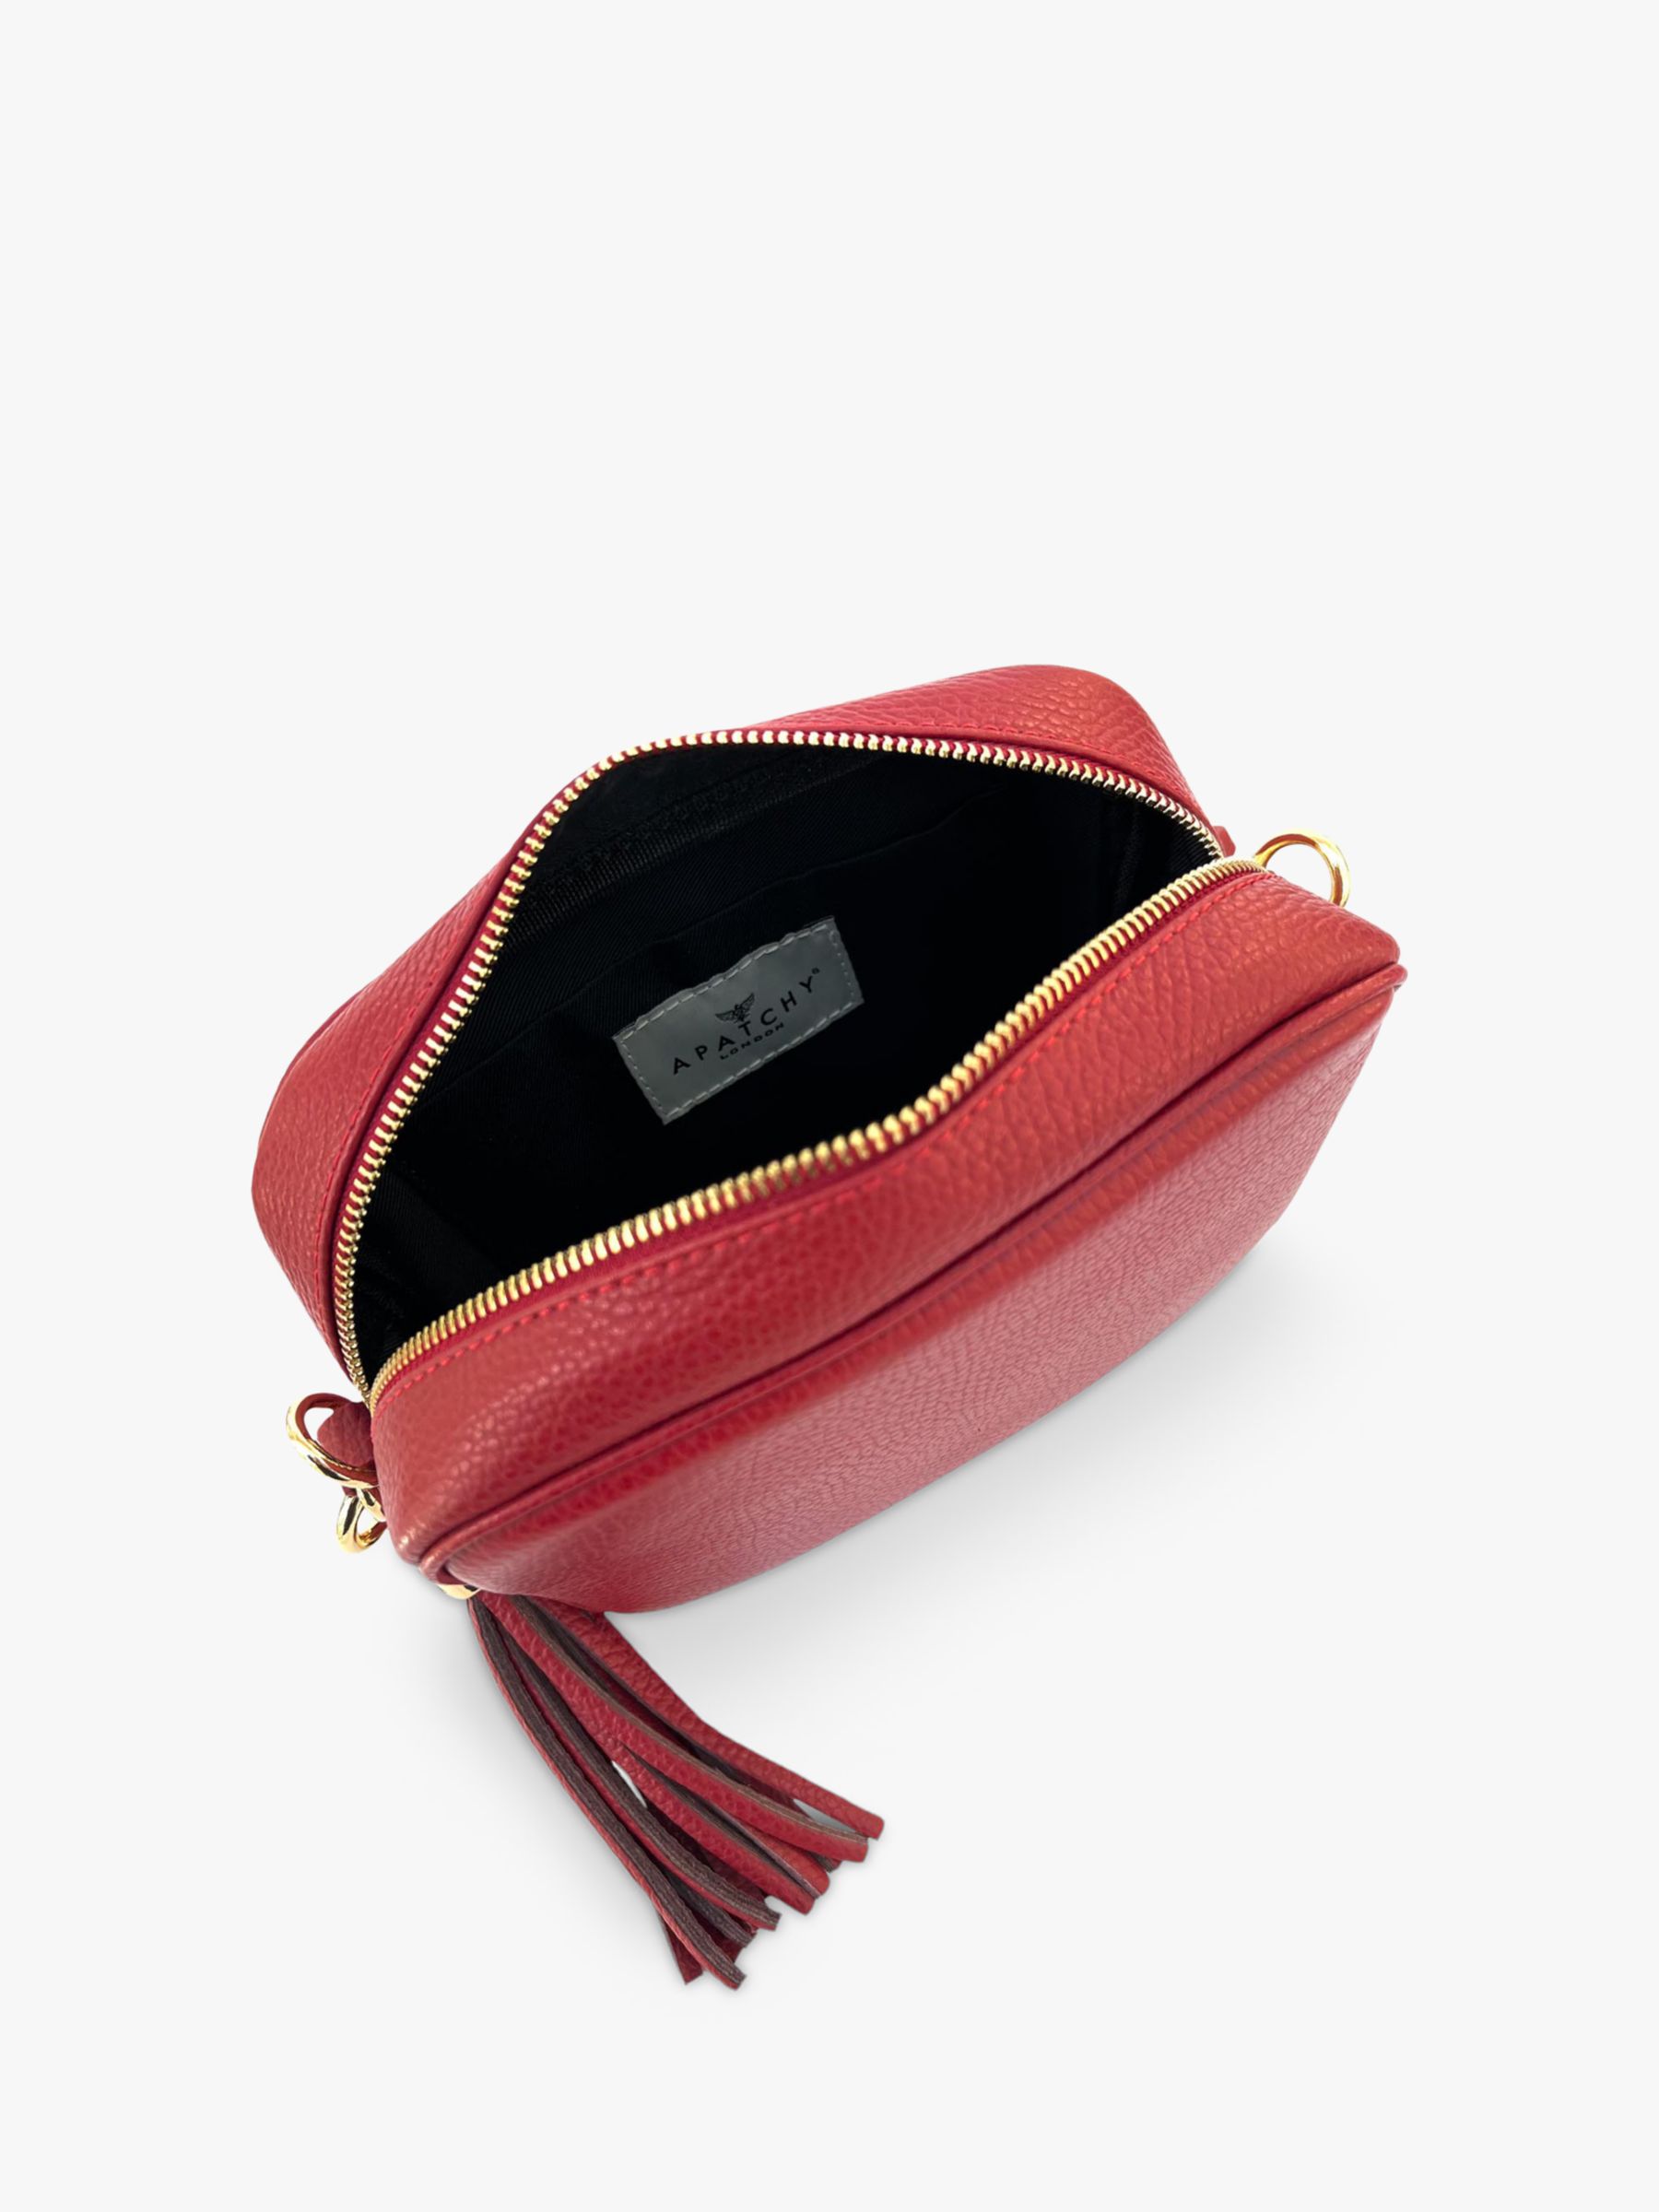 Apatchy Leather Crossbody Bag, Cherry Red